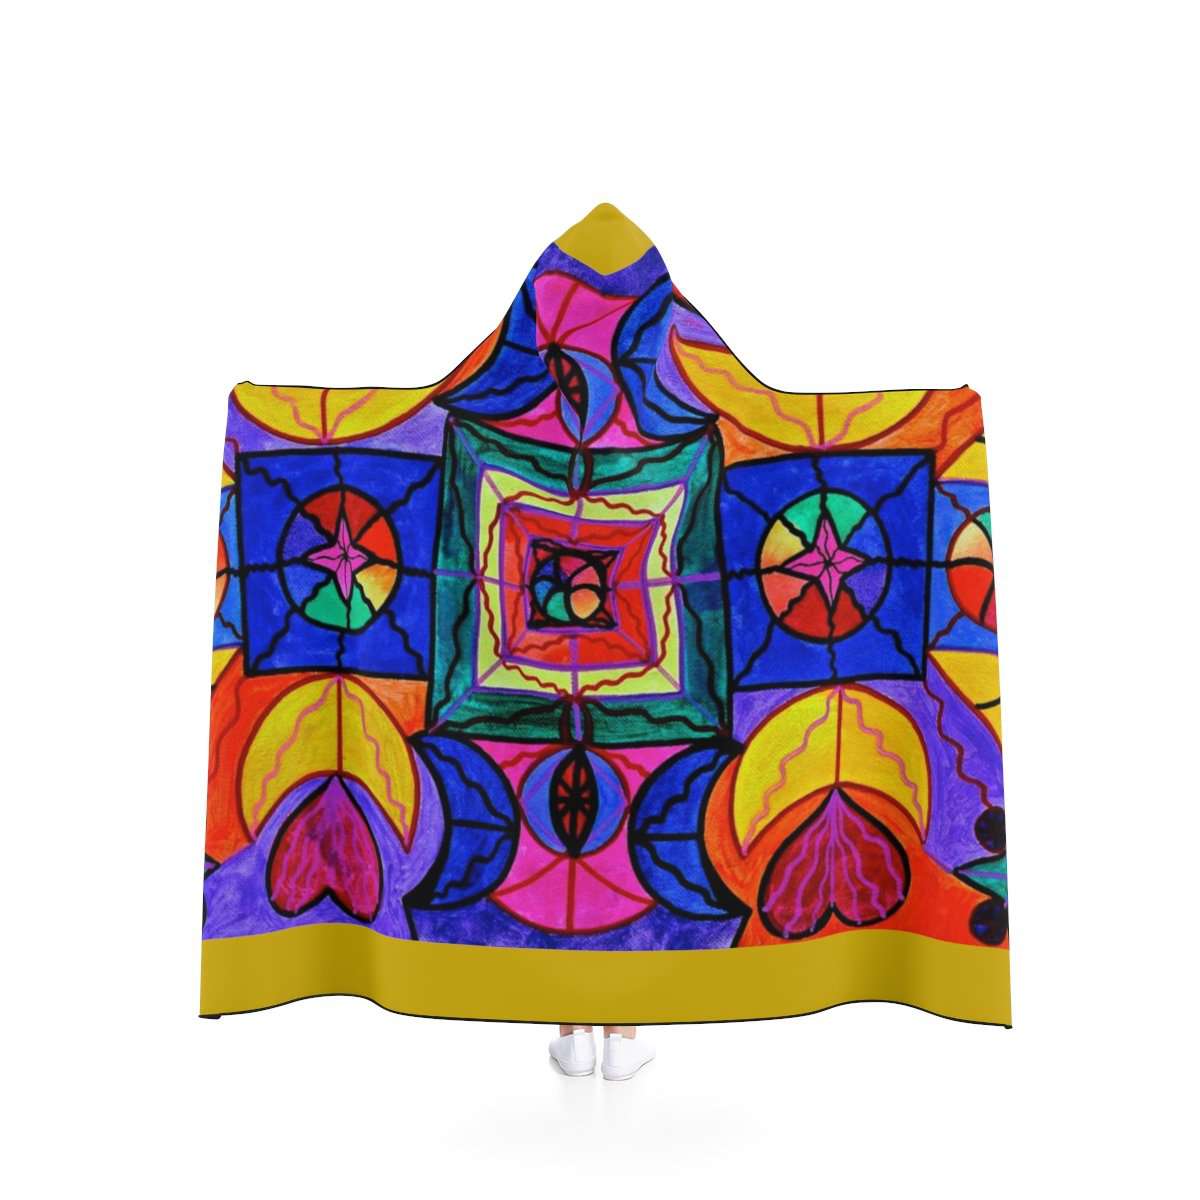 shop-the-official-online-store-of-play-hooded-blanket-online-hot-sale_3.jpg